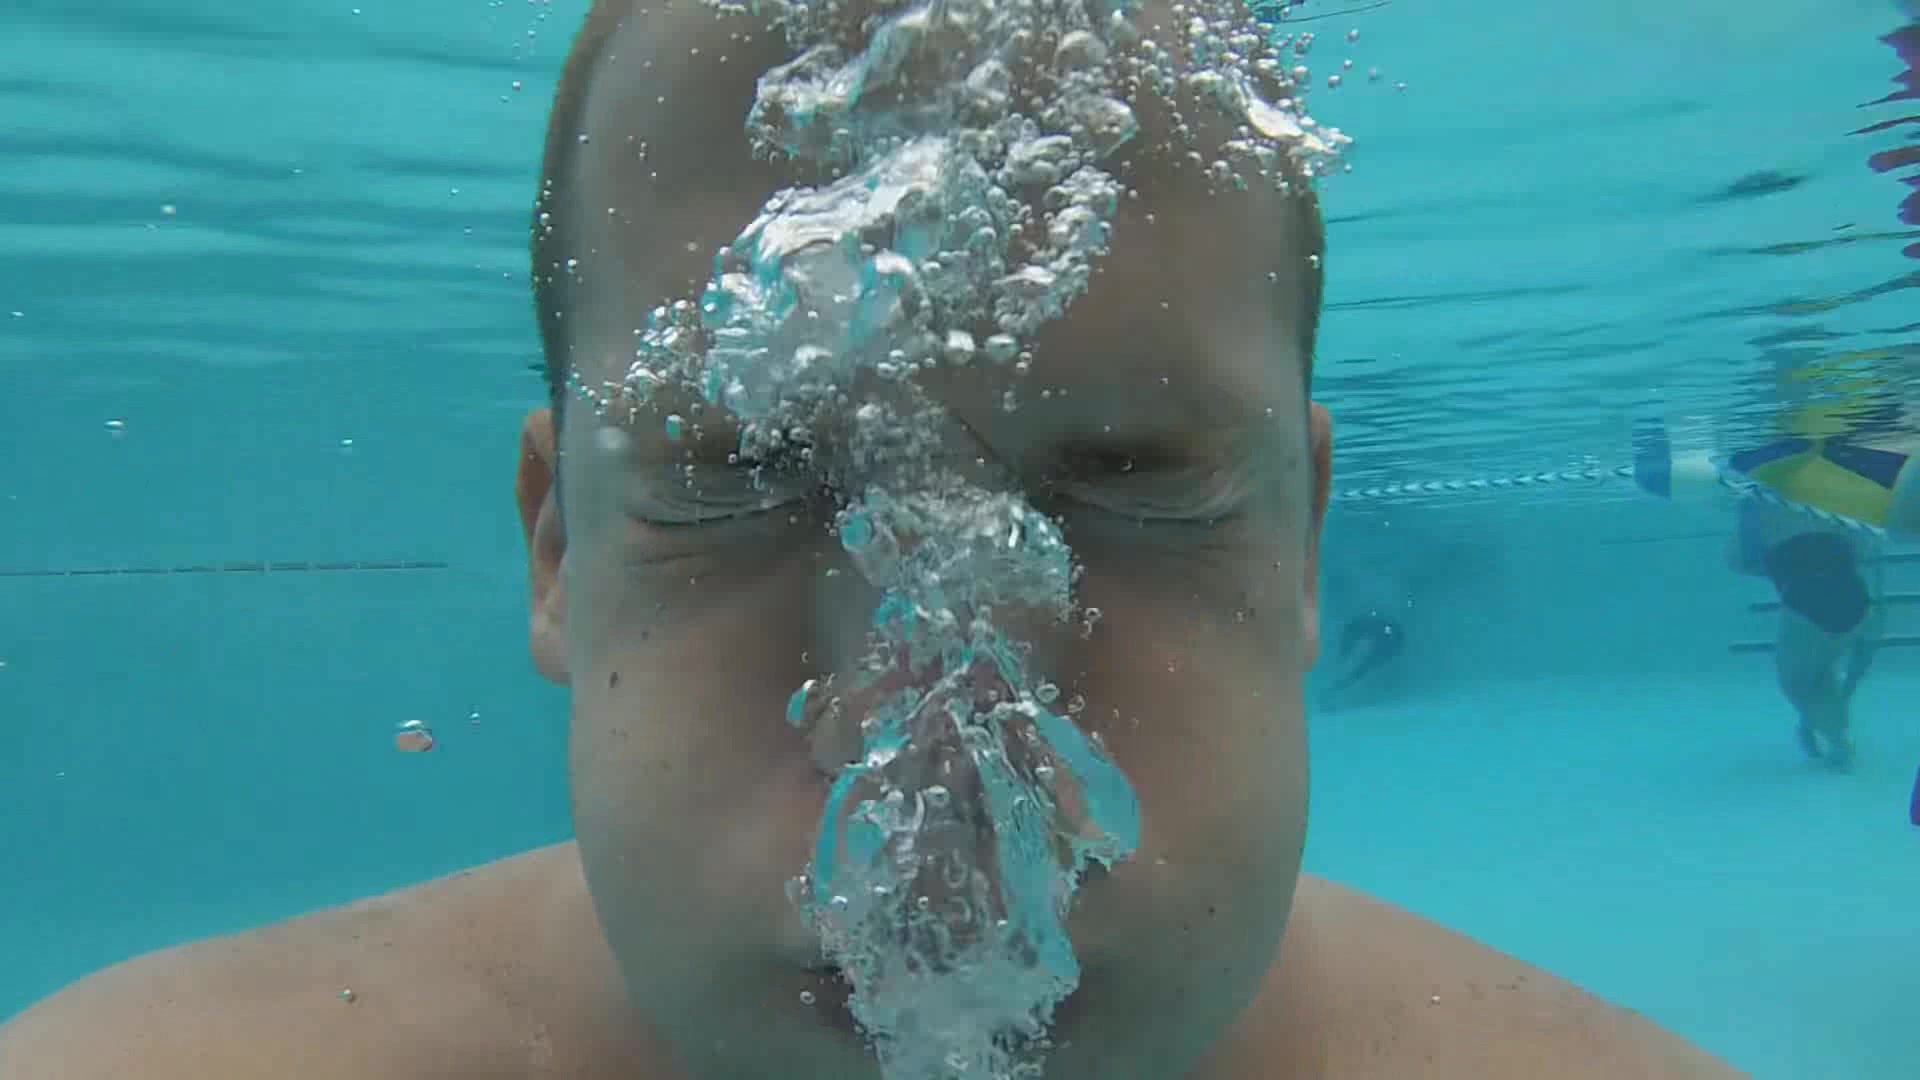 Blowing bubbles barefaced underwater in pool - video 2